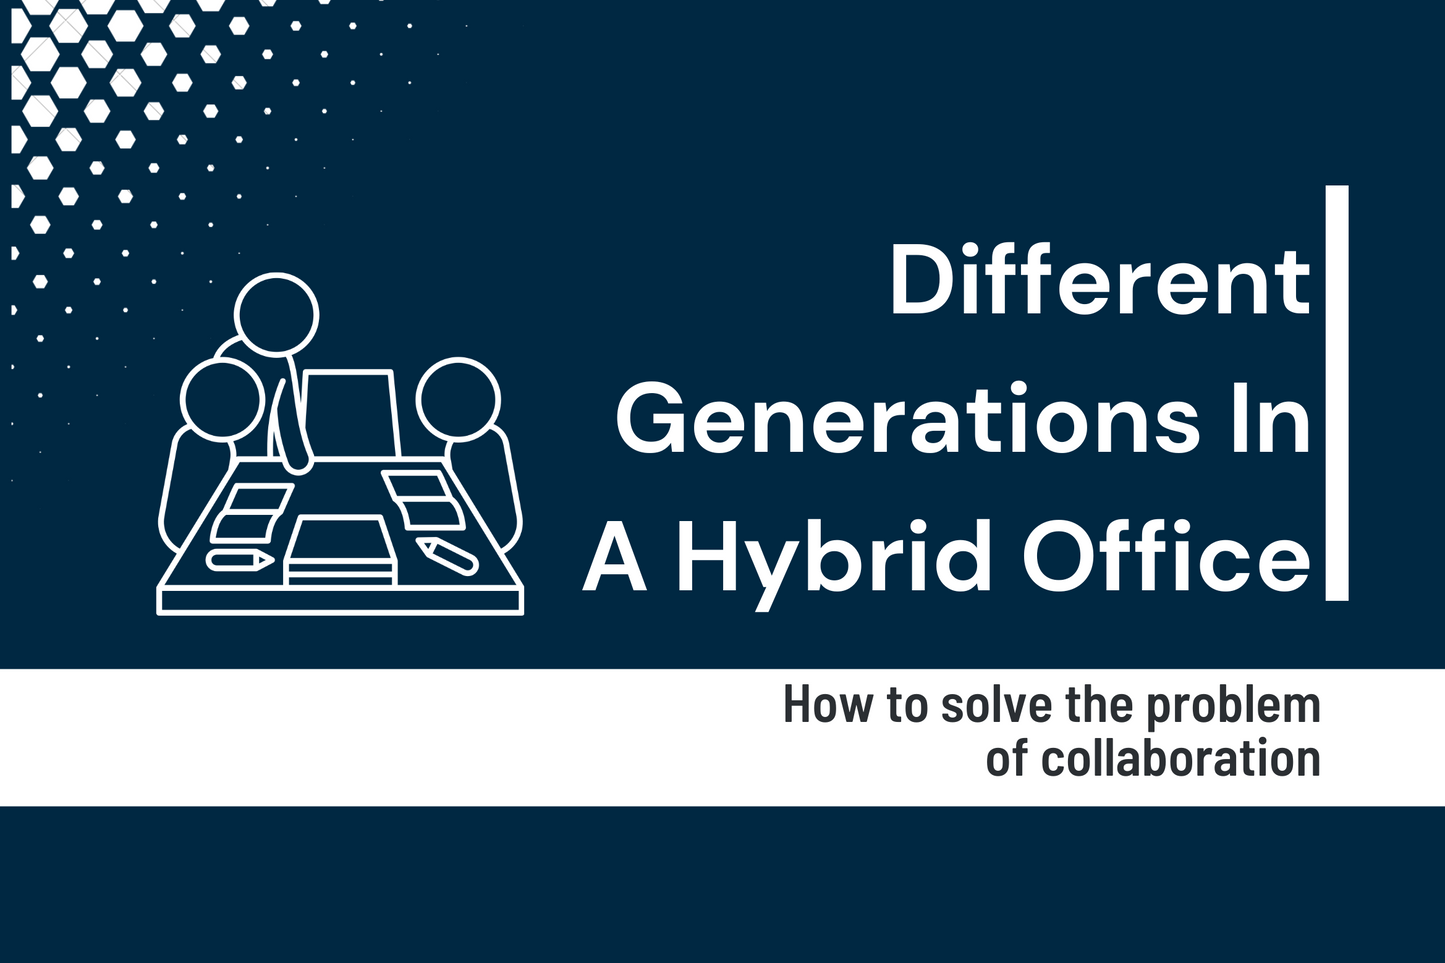 How to Solve the Problem of Collaboration Between Different Generations in a Hybrid Office